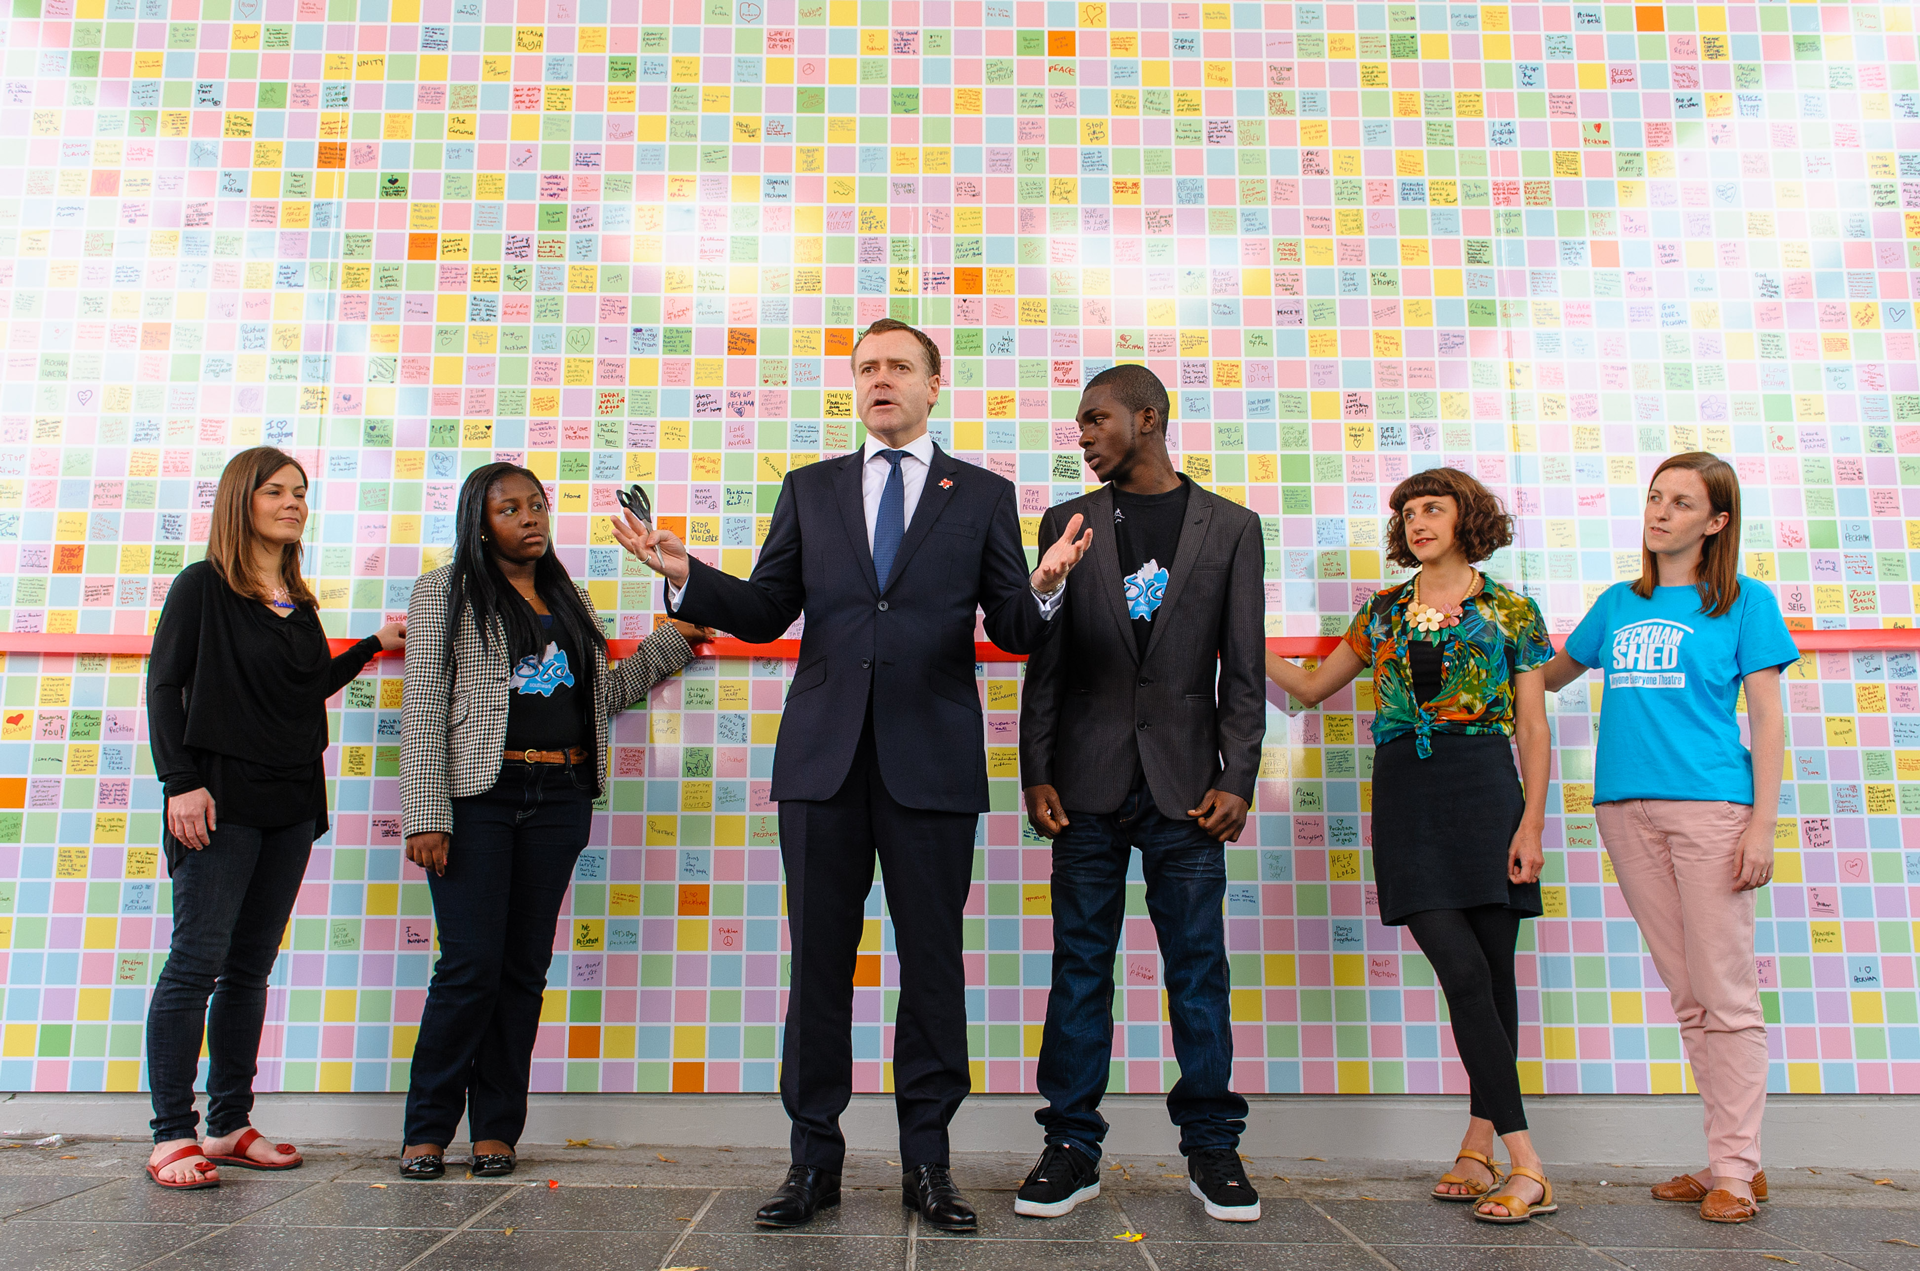 image of a group of people standing in front of the Peckham Peace Wall